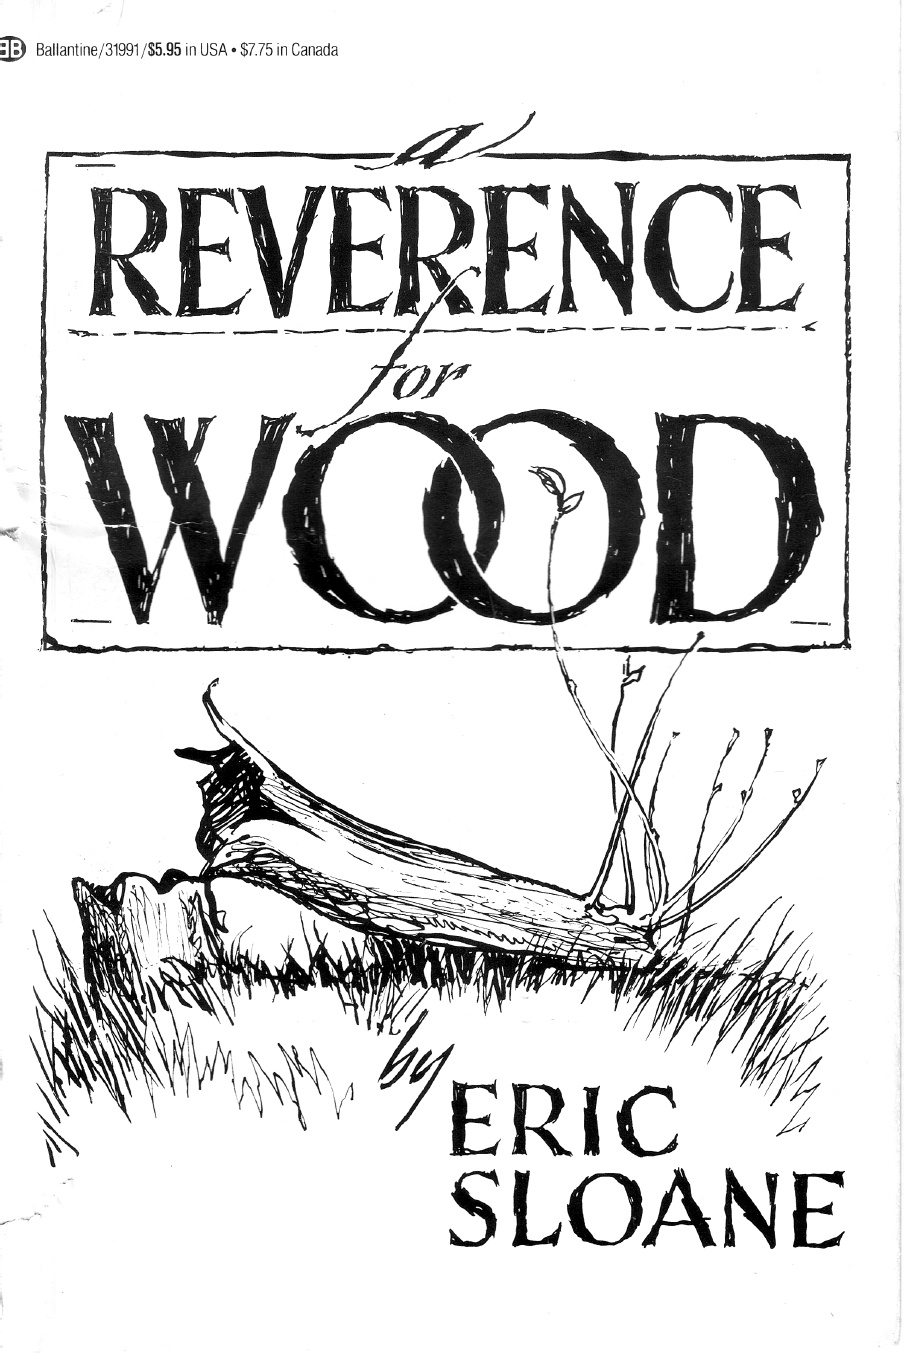 A Reverence for Wood Eric Sloane